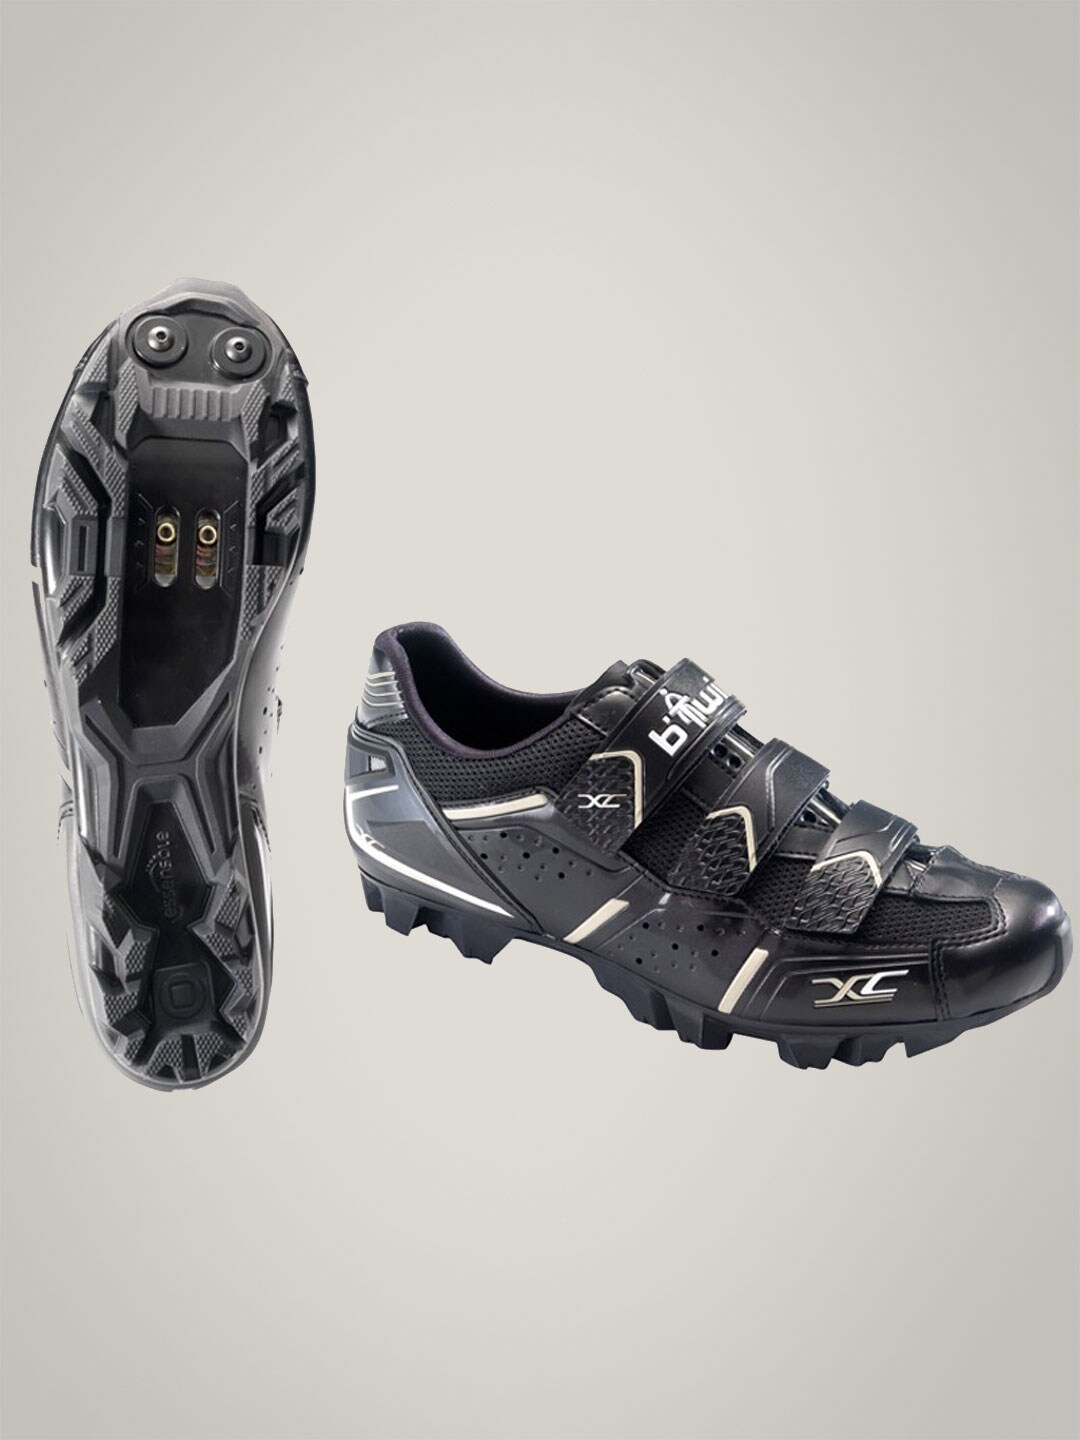 Btwin Mtb Shoes 7